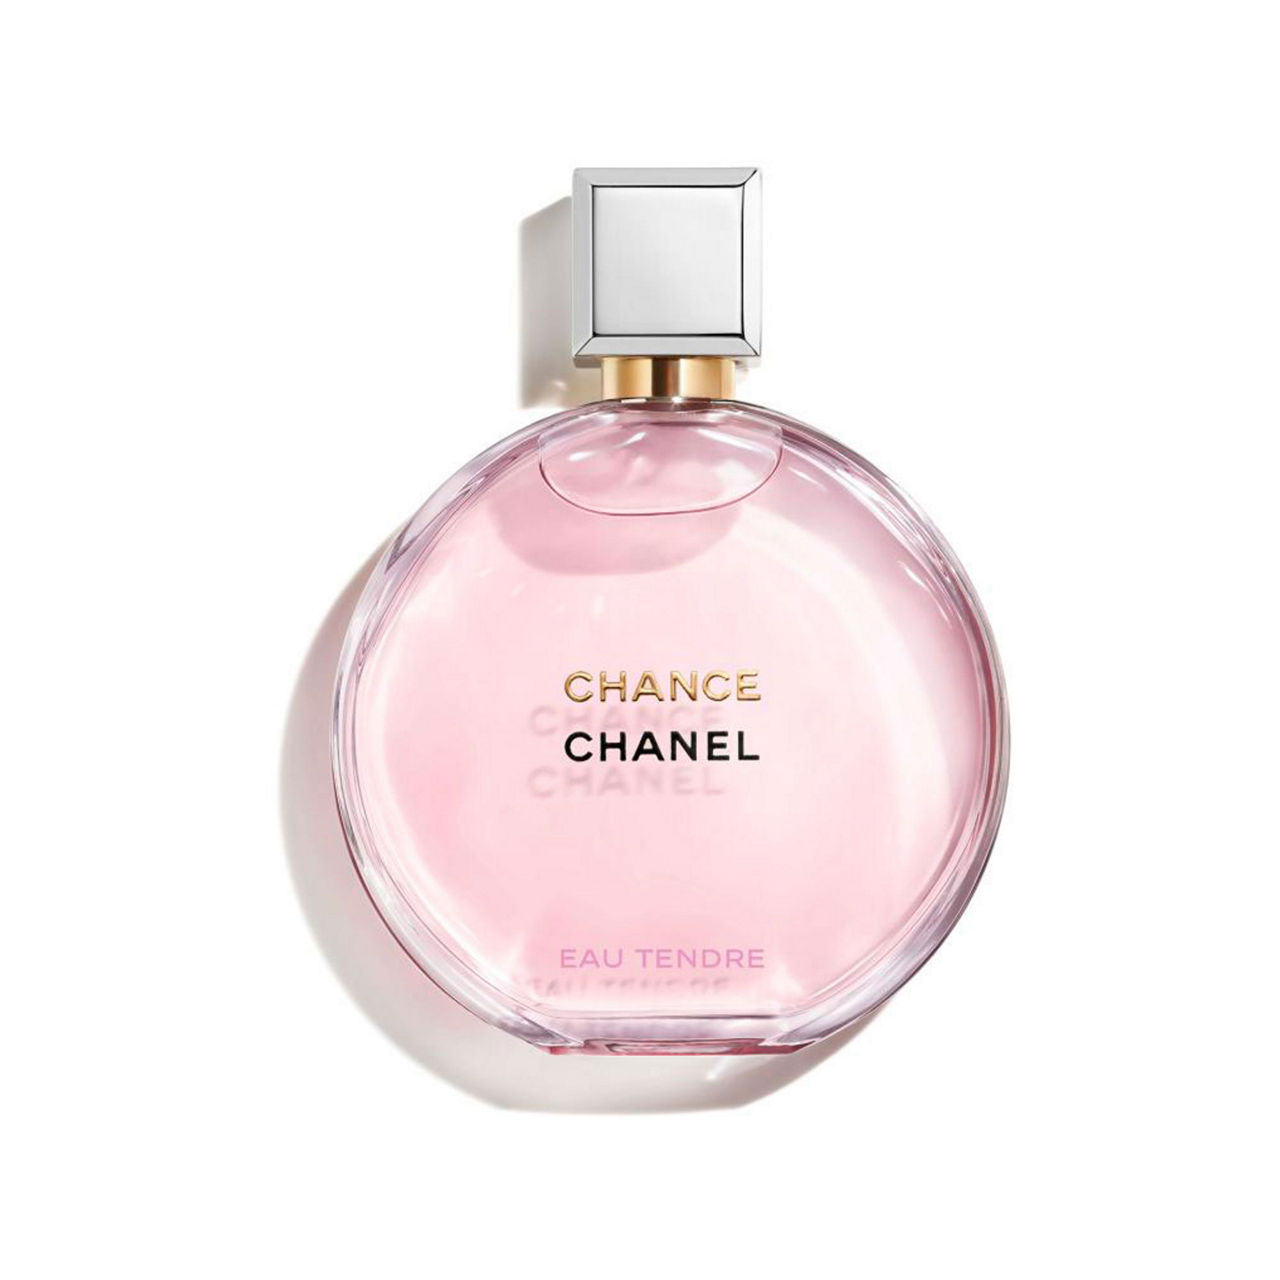 Persolaise Review: Chance Eau Vive from Chanel (Olivier Polge; 2015) 